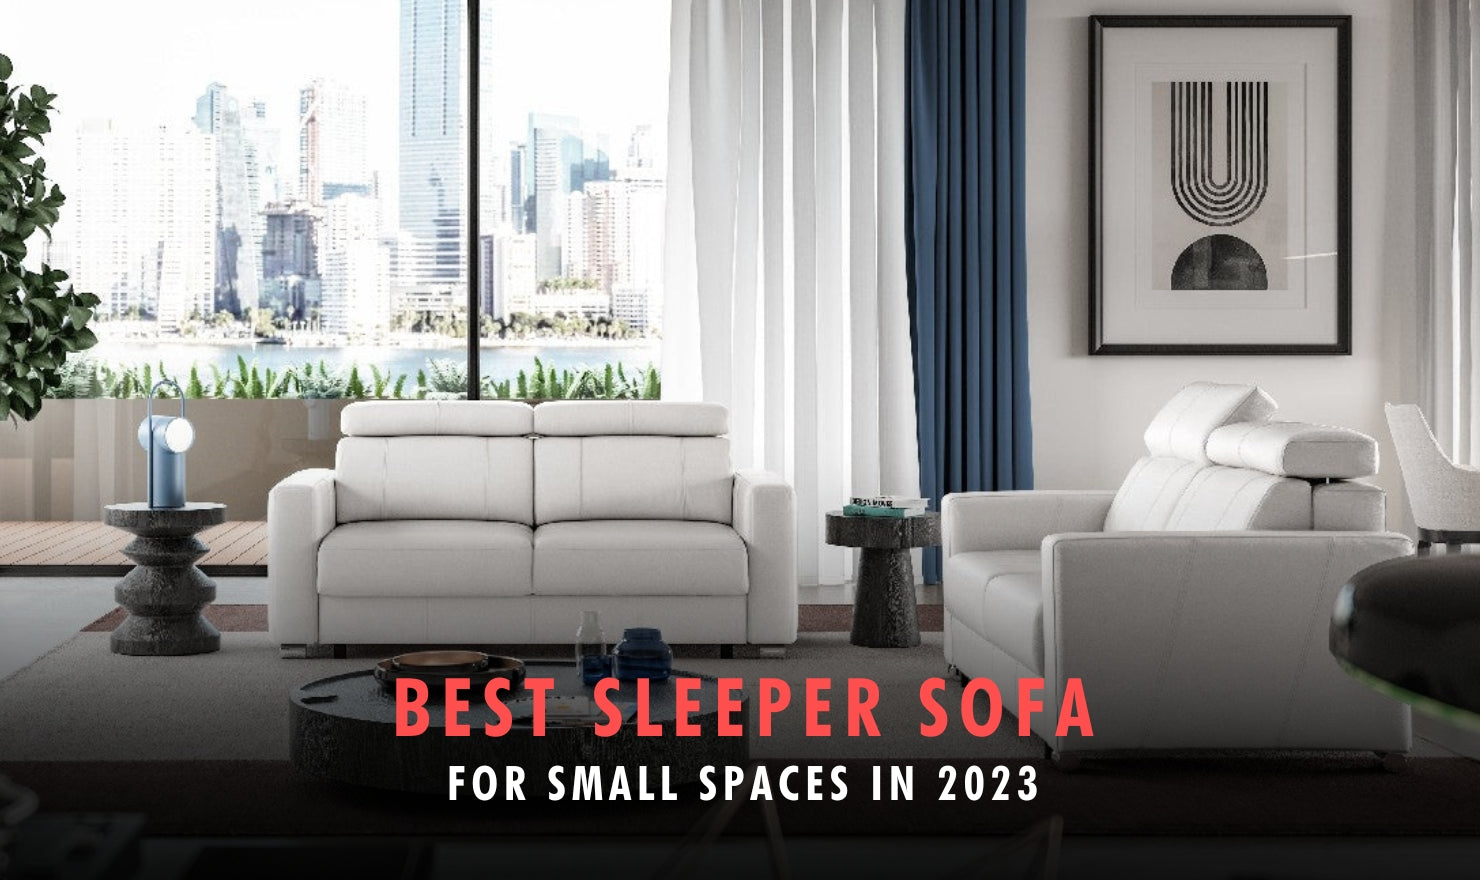 Best Sleeper Sofa for Small Spaces